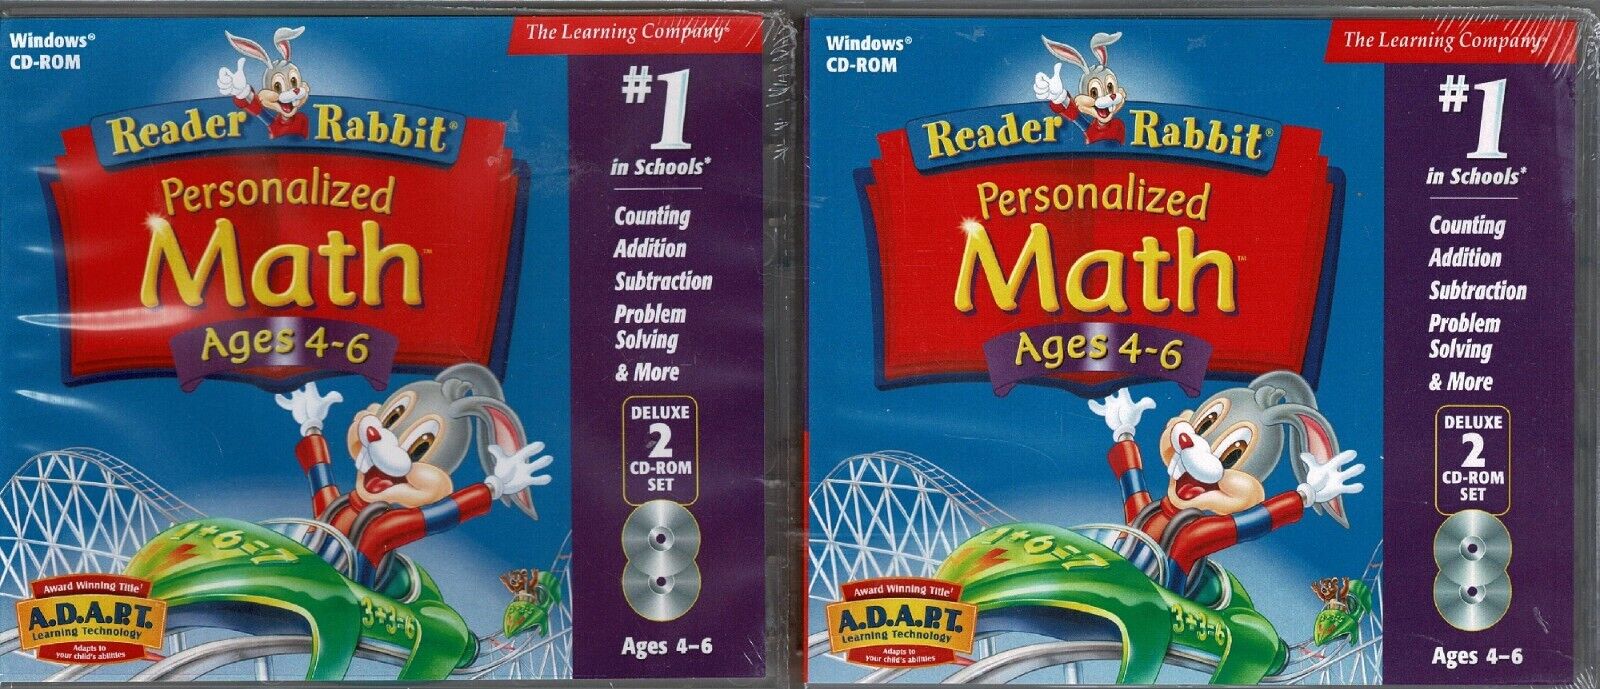 Lot of 2 Reader Rabbit Personalized Math Ages 4 to 6 Pc New XP Save More